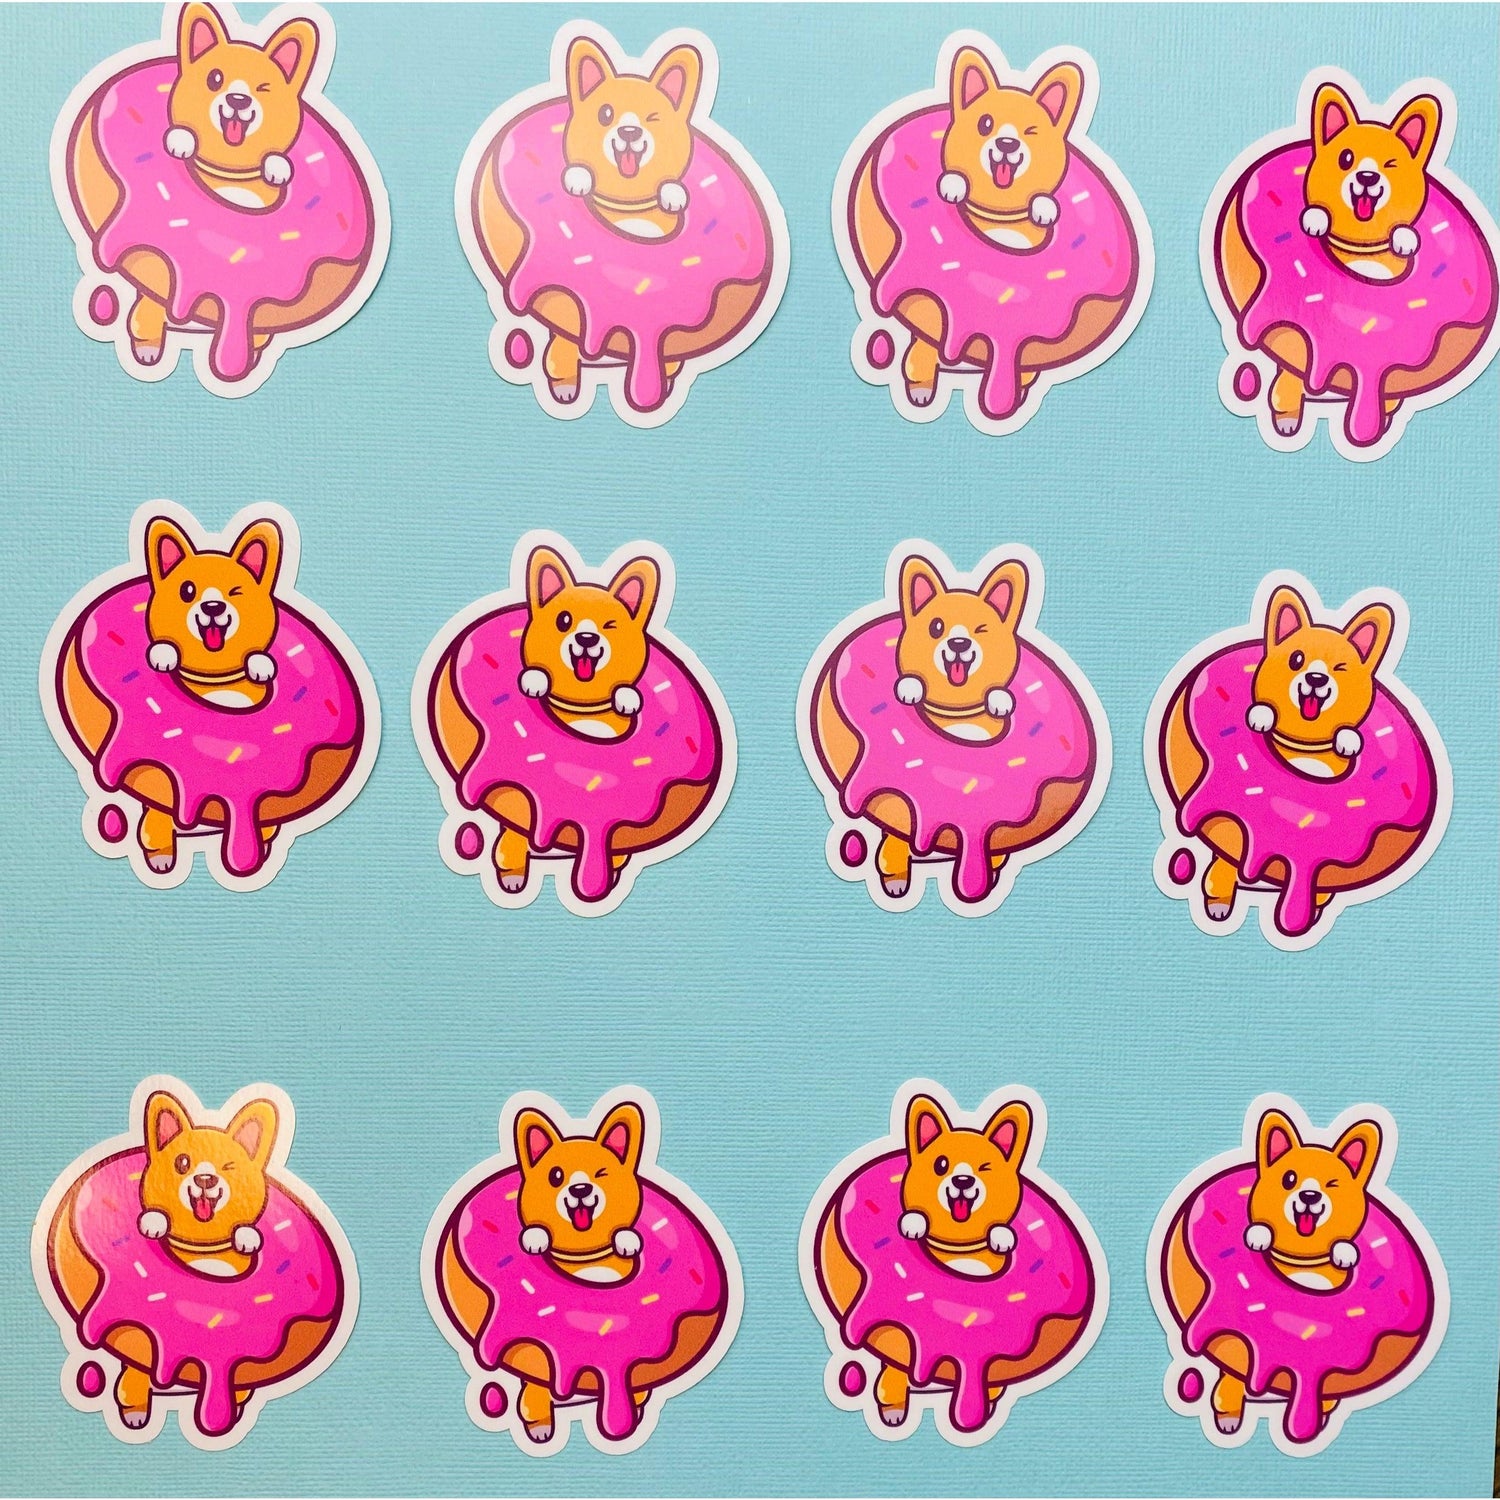 Corgi Donut Sticker - Cute Kawii Corgi with Pink Sprinkled Donut Sticker for Girls, Sticker for Women Pink Sticker Aesthetic Sprinkles - Ottos Grotto :: Stickers For Your Stuff